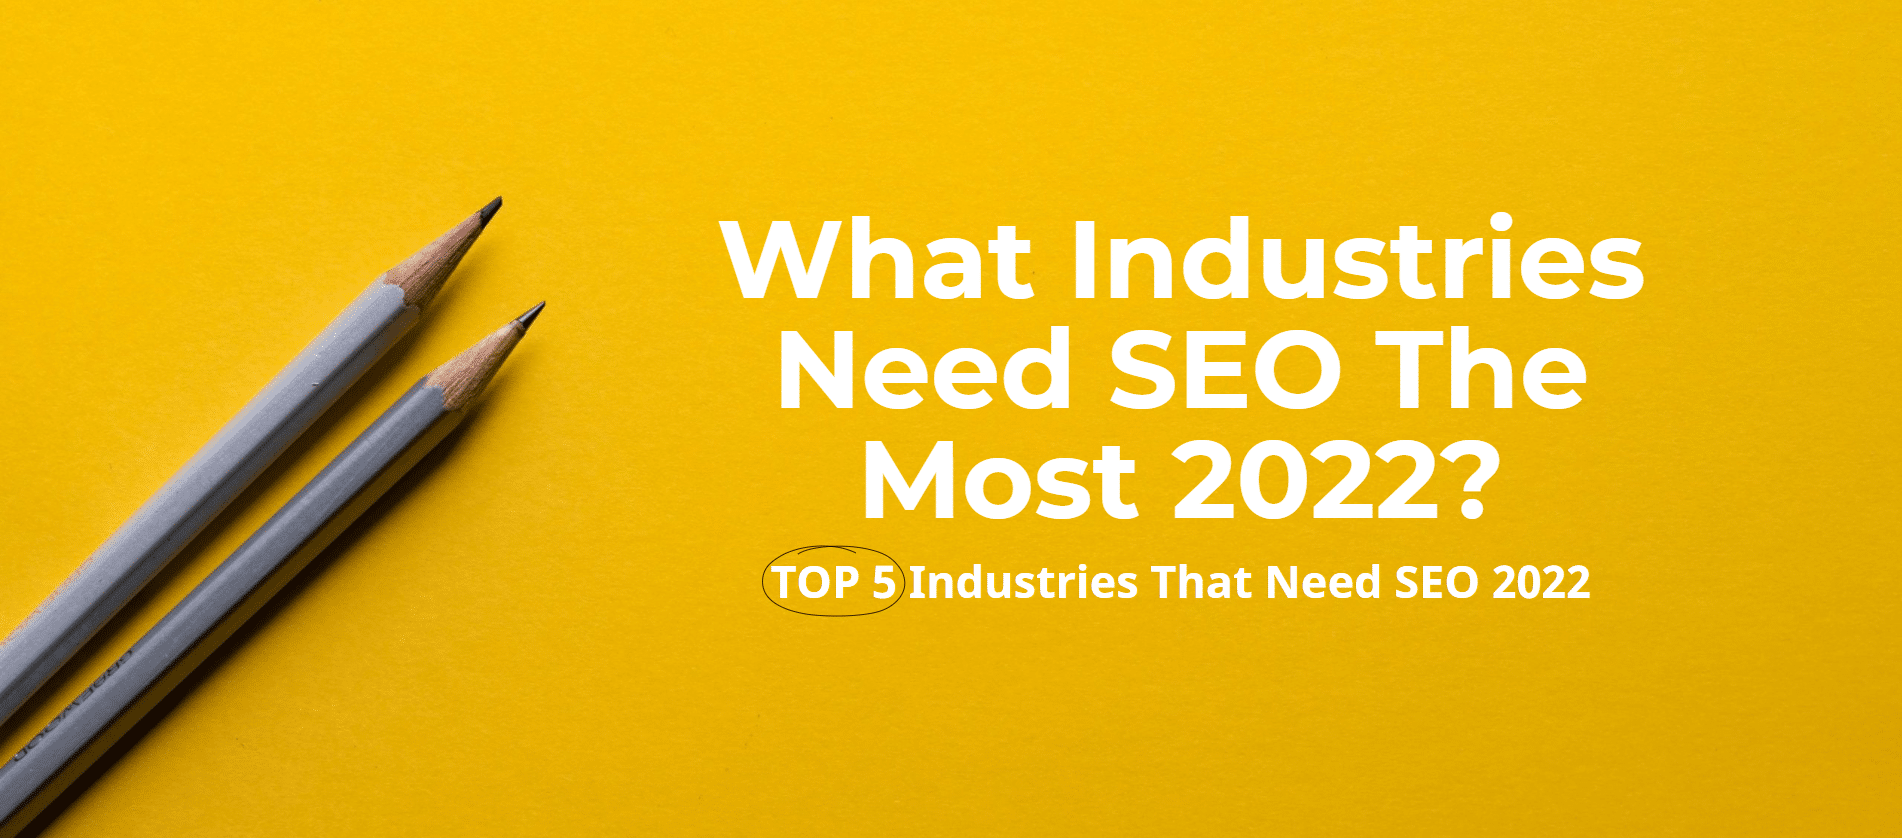 what-industries-need-seo-the-most-2022-top-5-industries-that-need-seo-2022